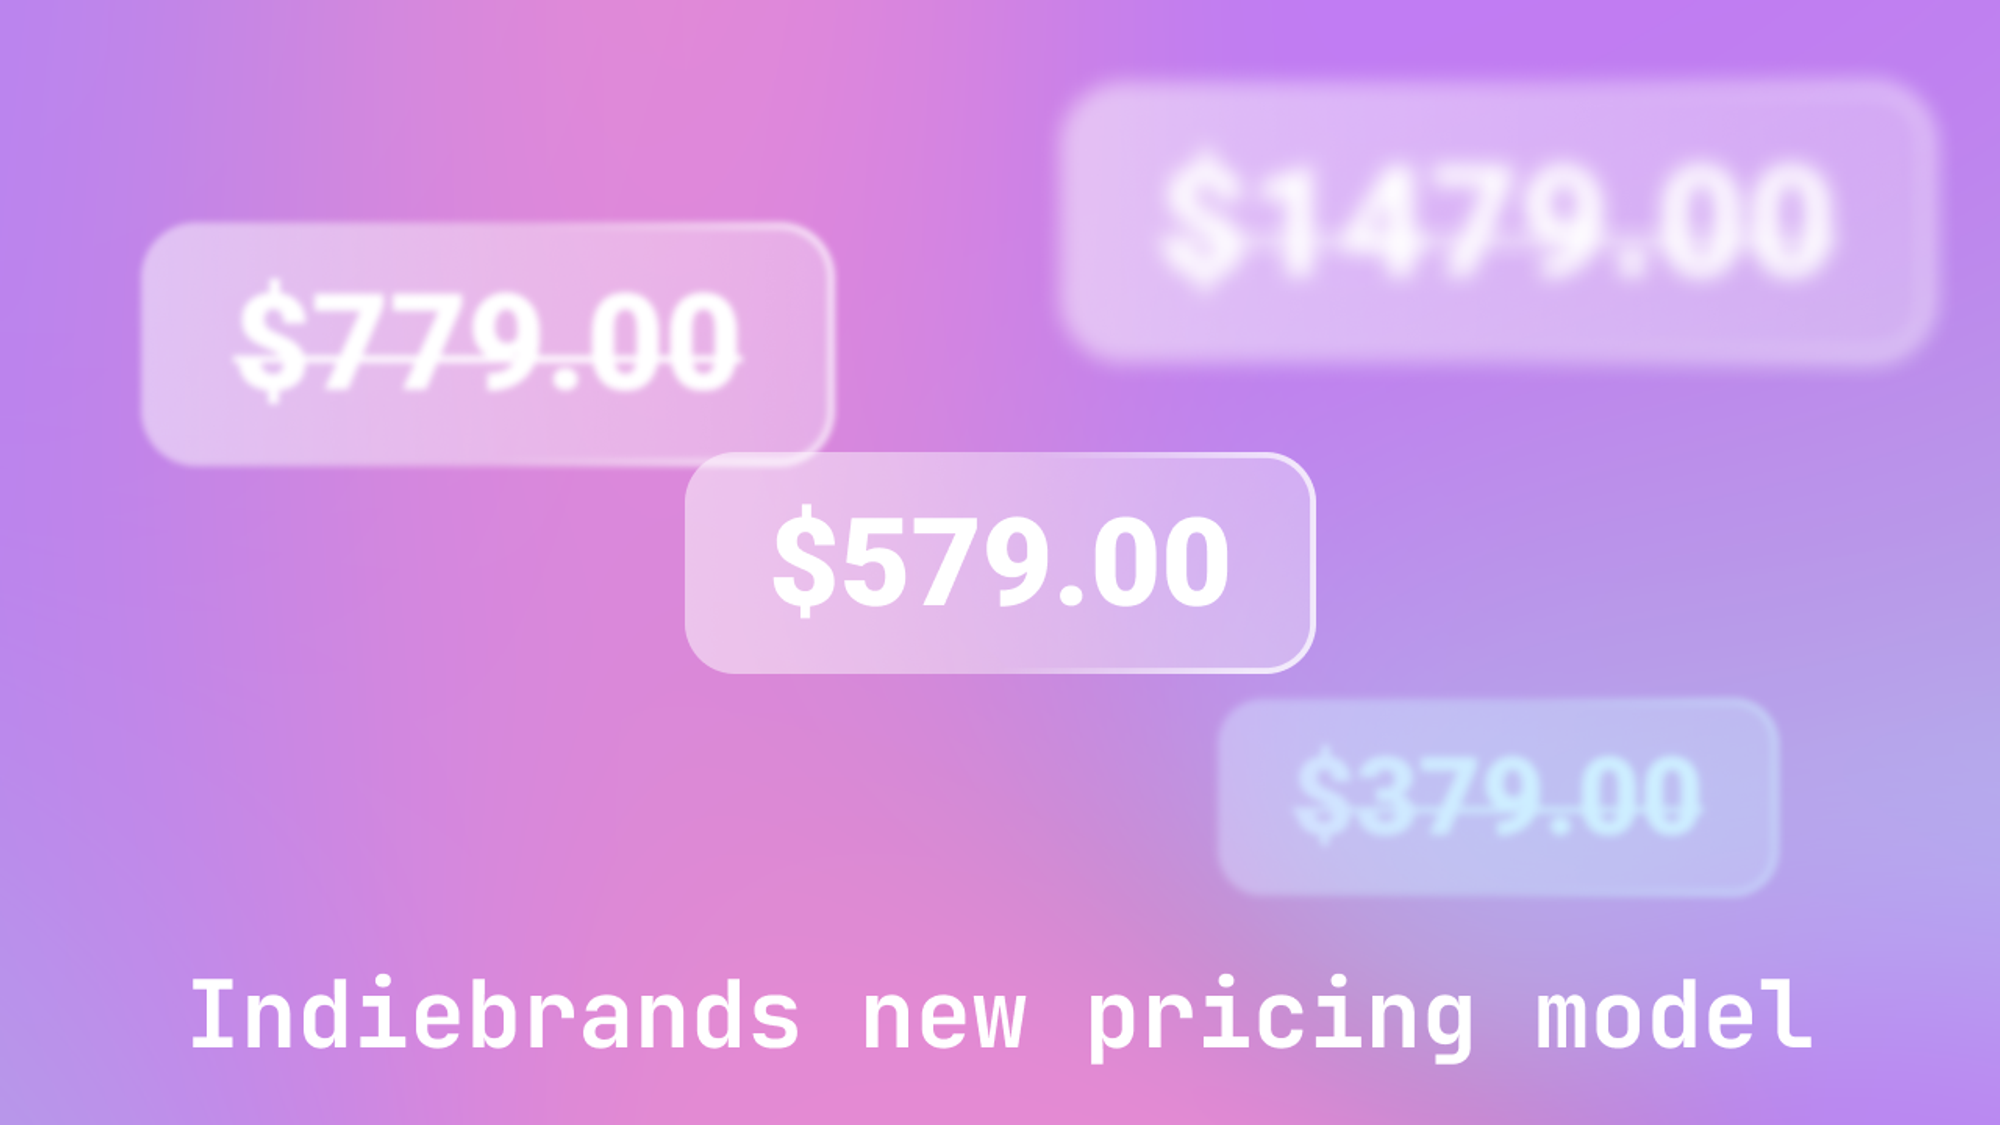 We changed our pricing model. Here’s why: